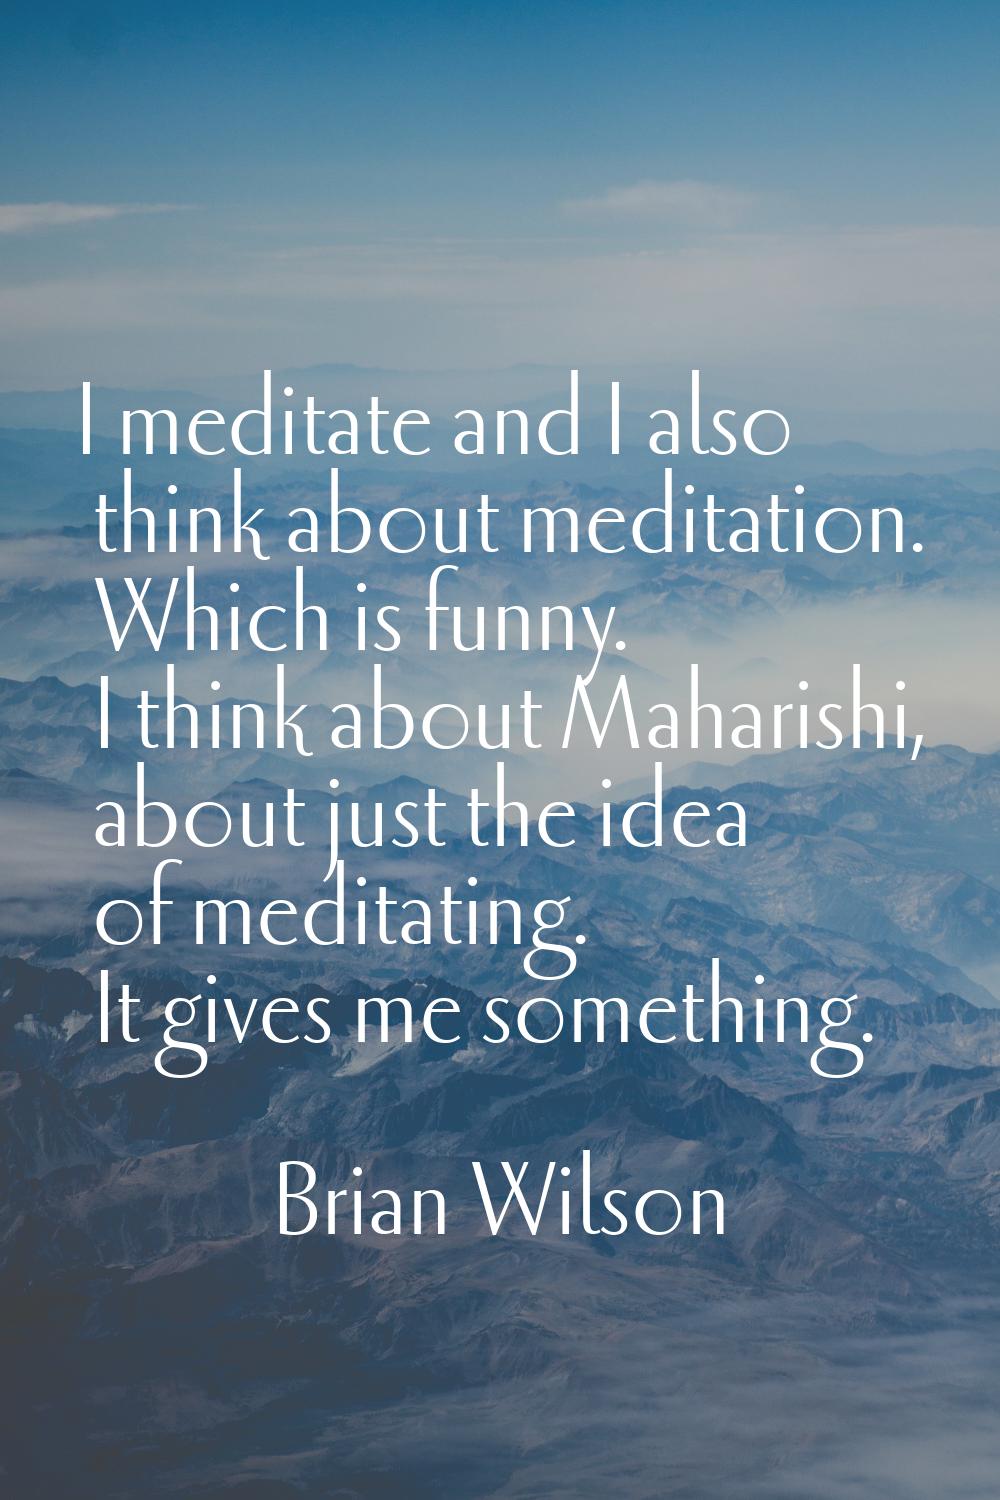 I meditate and I also think about meditation. Which is funny. I think about Maharishi, about just t